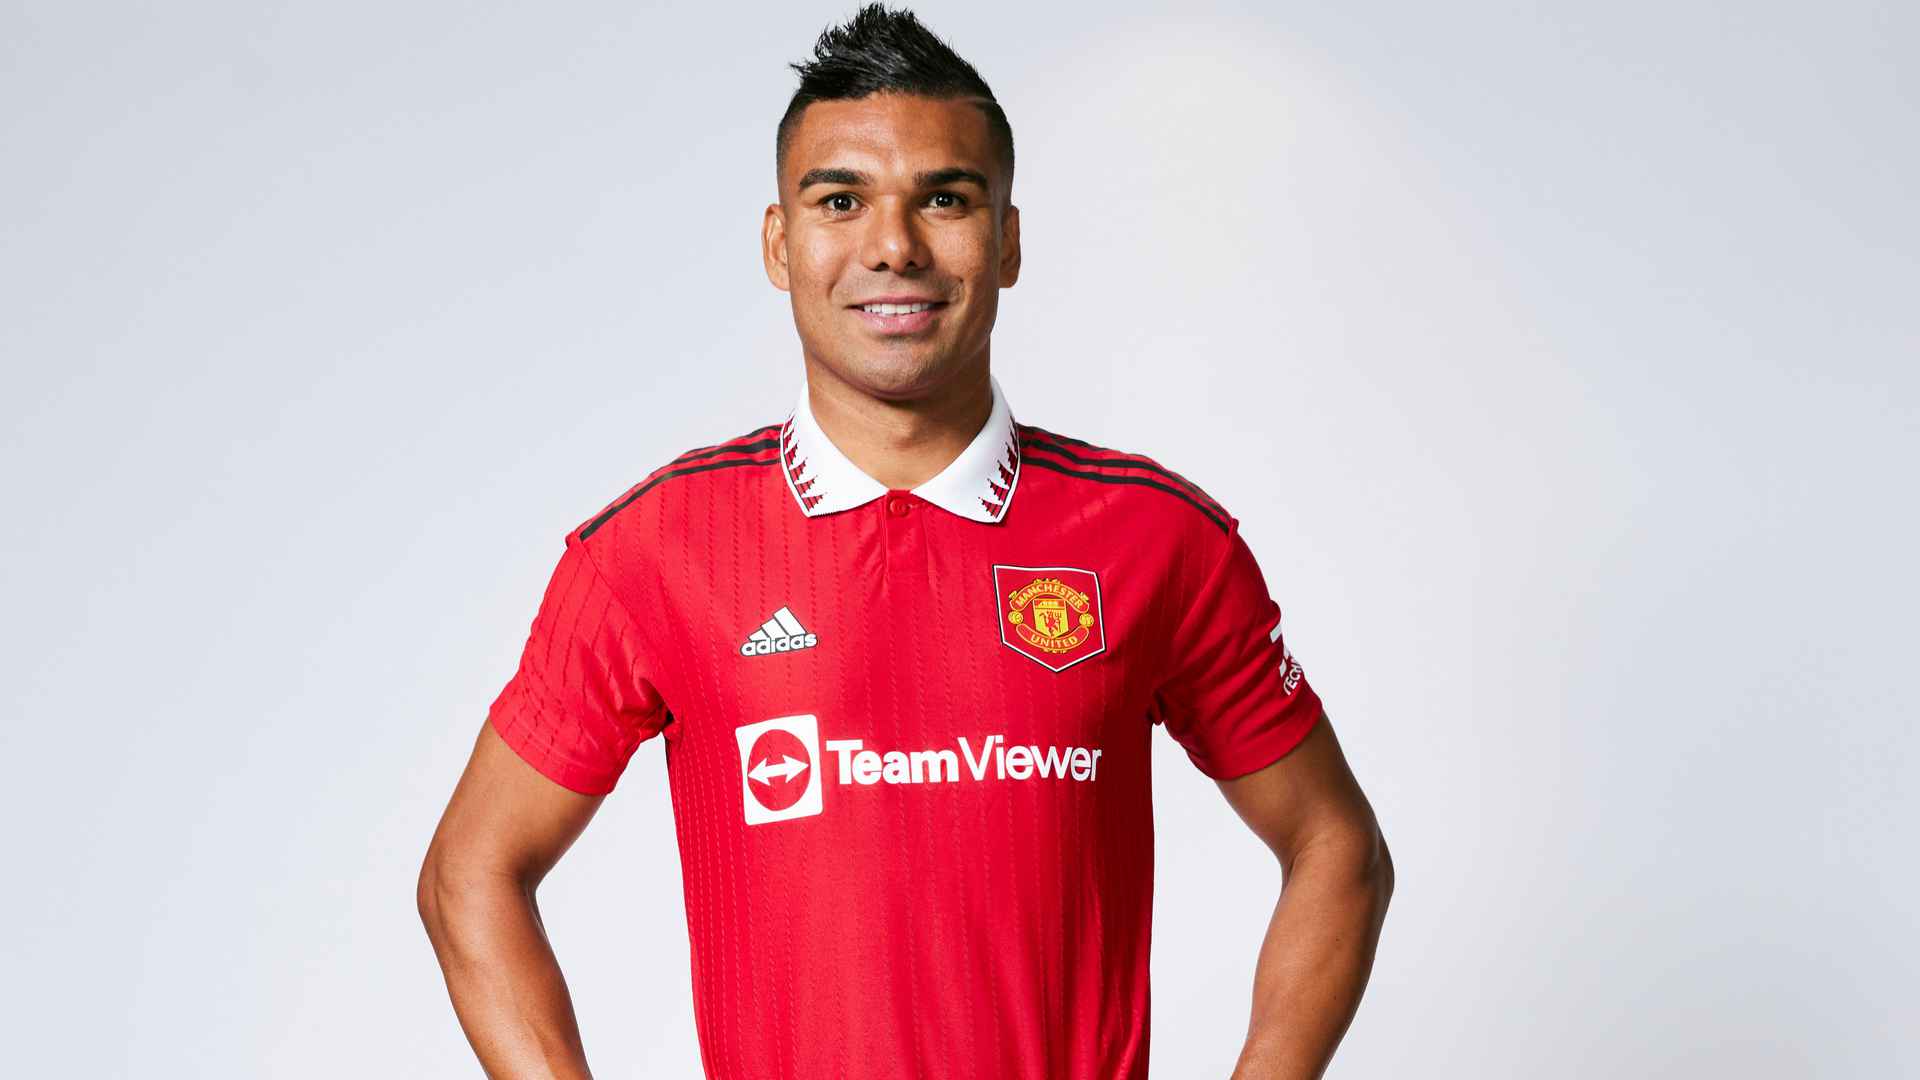 Casemiro Biography: Wife, Net Worth, Age, Salary, Stats, Height, Parents, FIFA, Videos